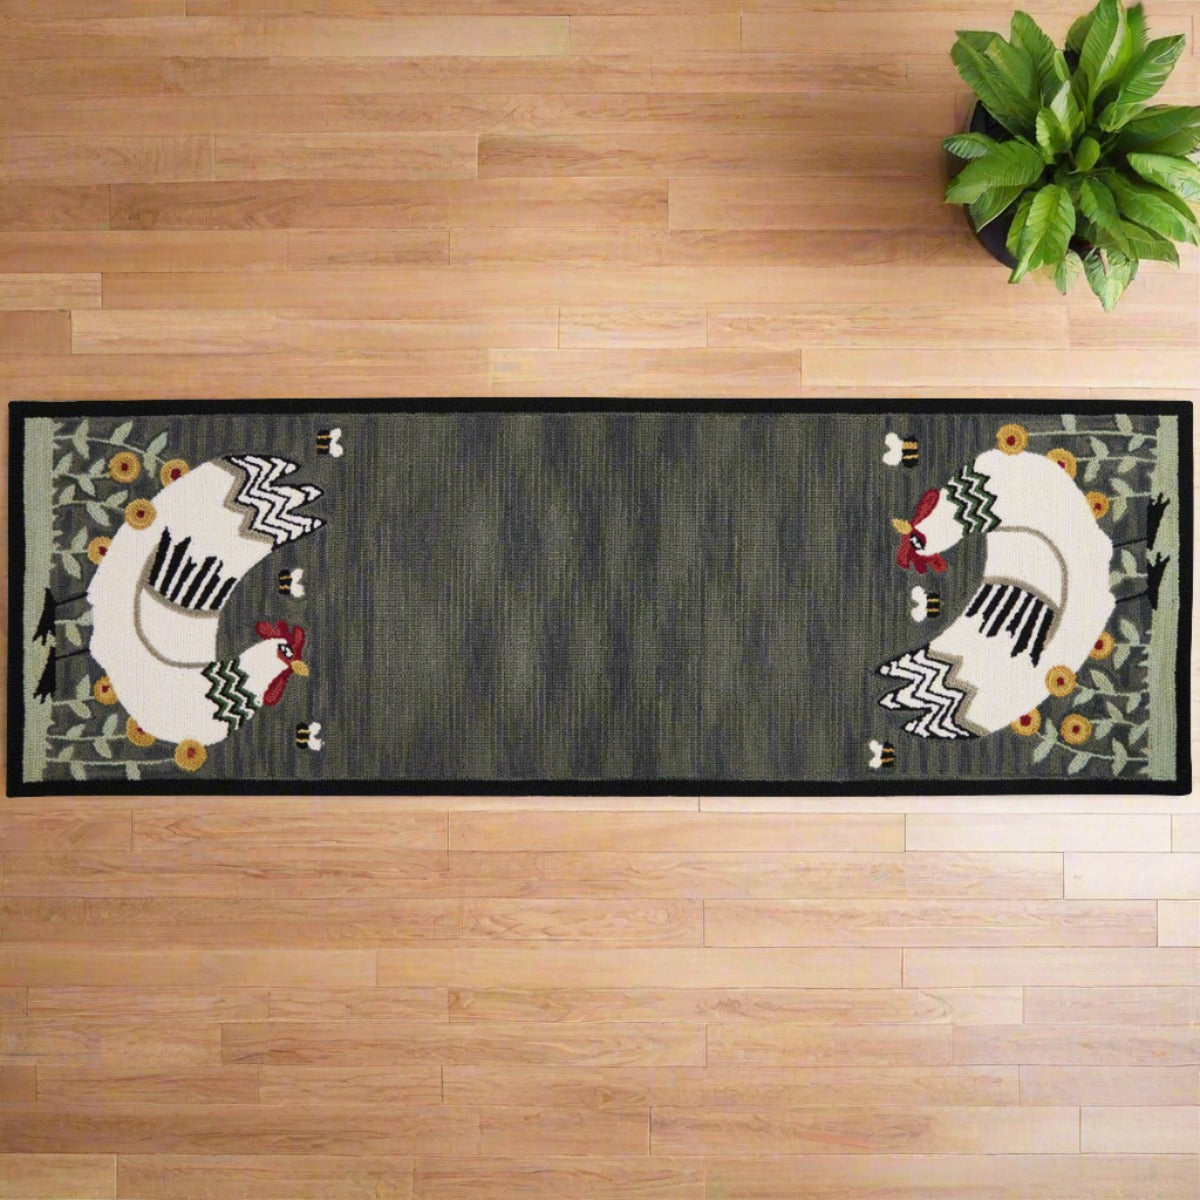 Primitive White Chicken w/ Flowers and Bees Hooked Rug Runner 2&